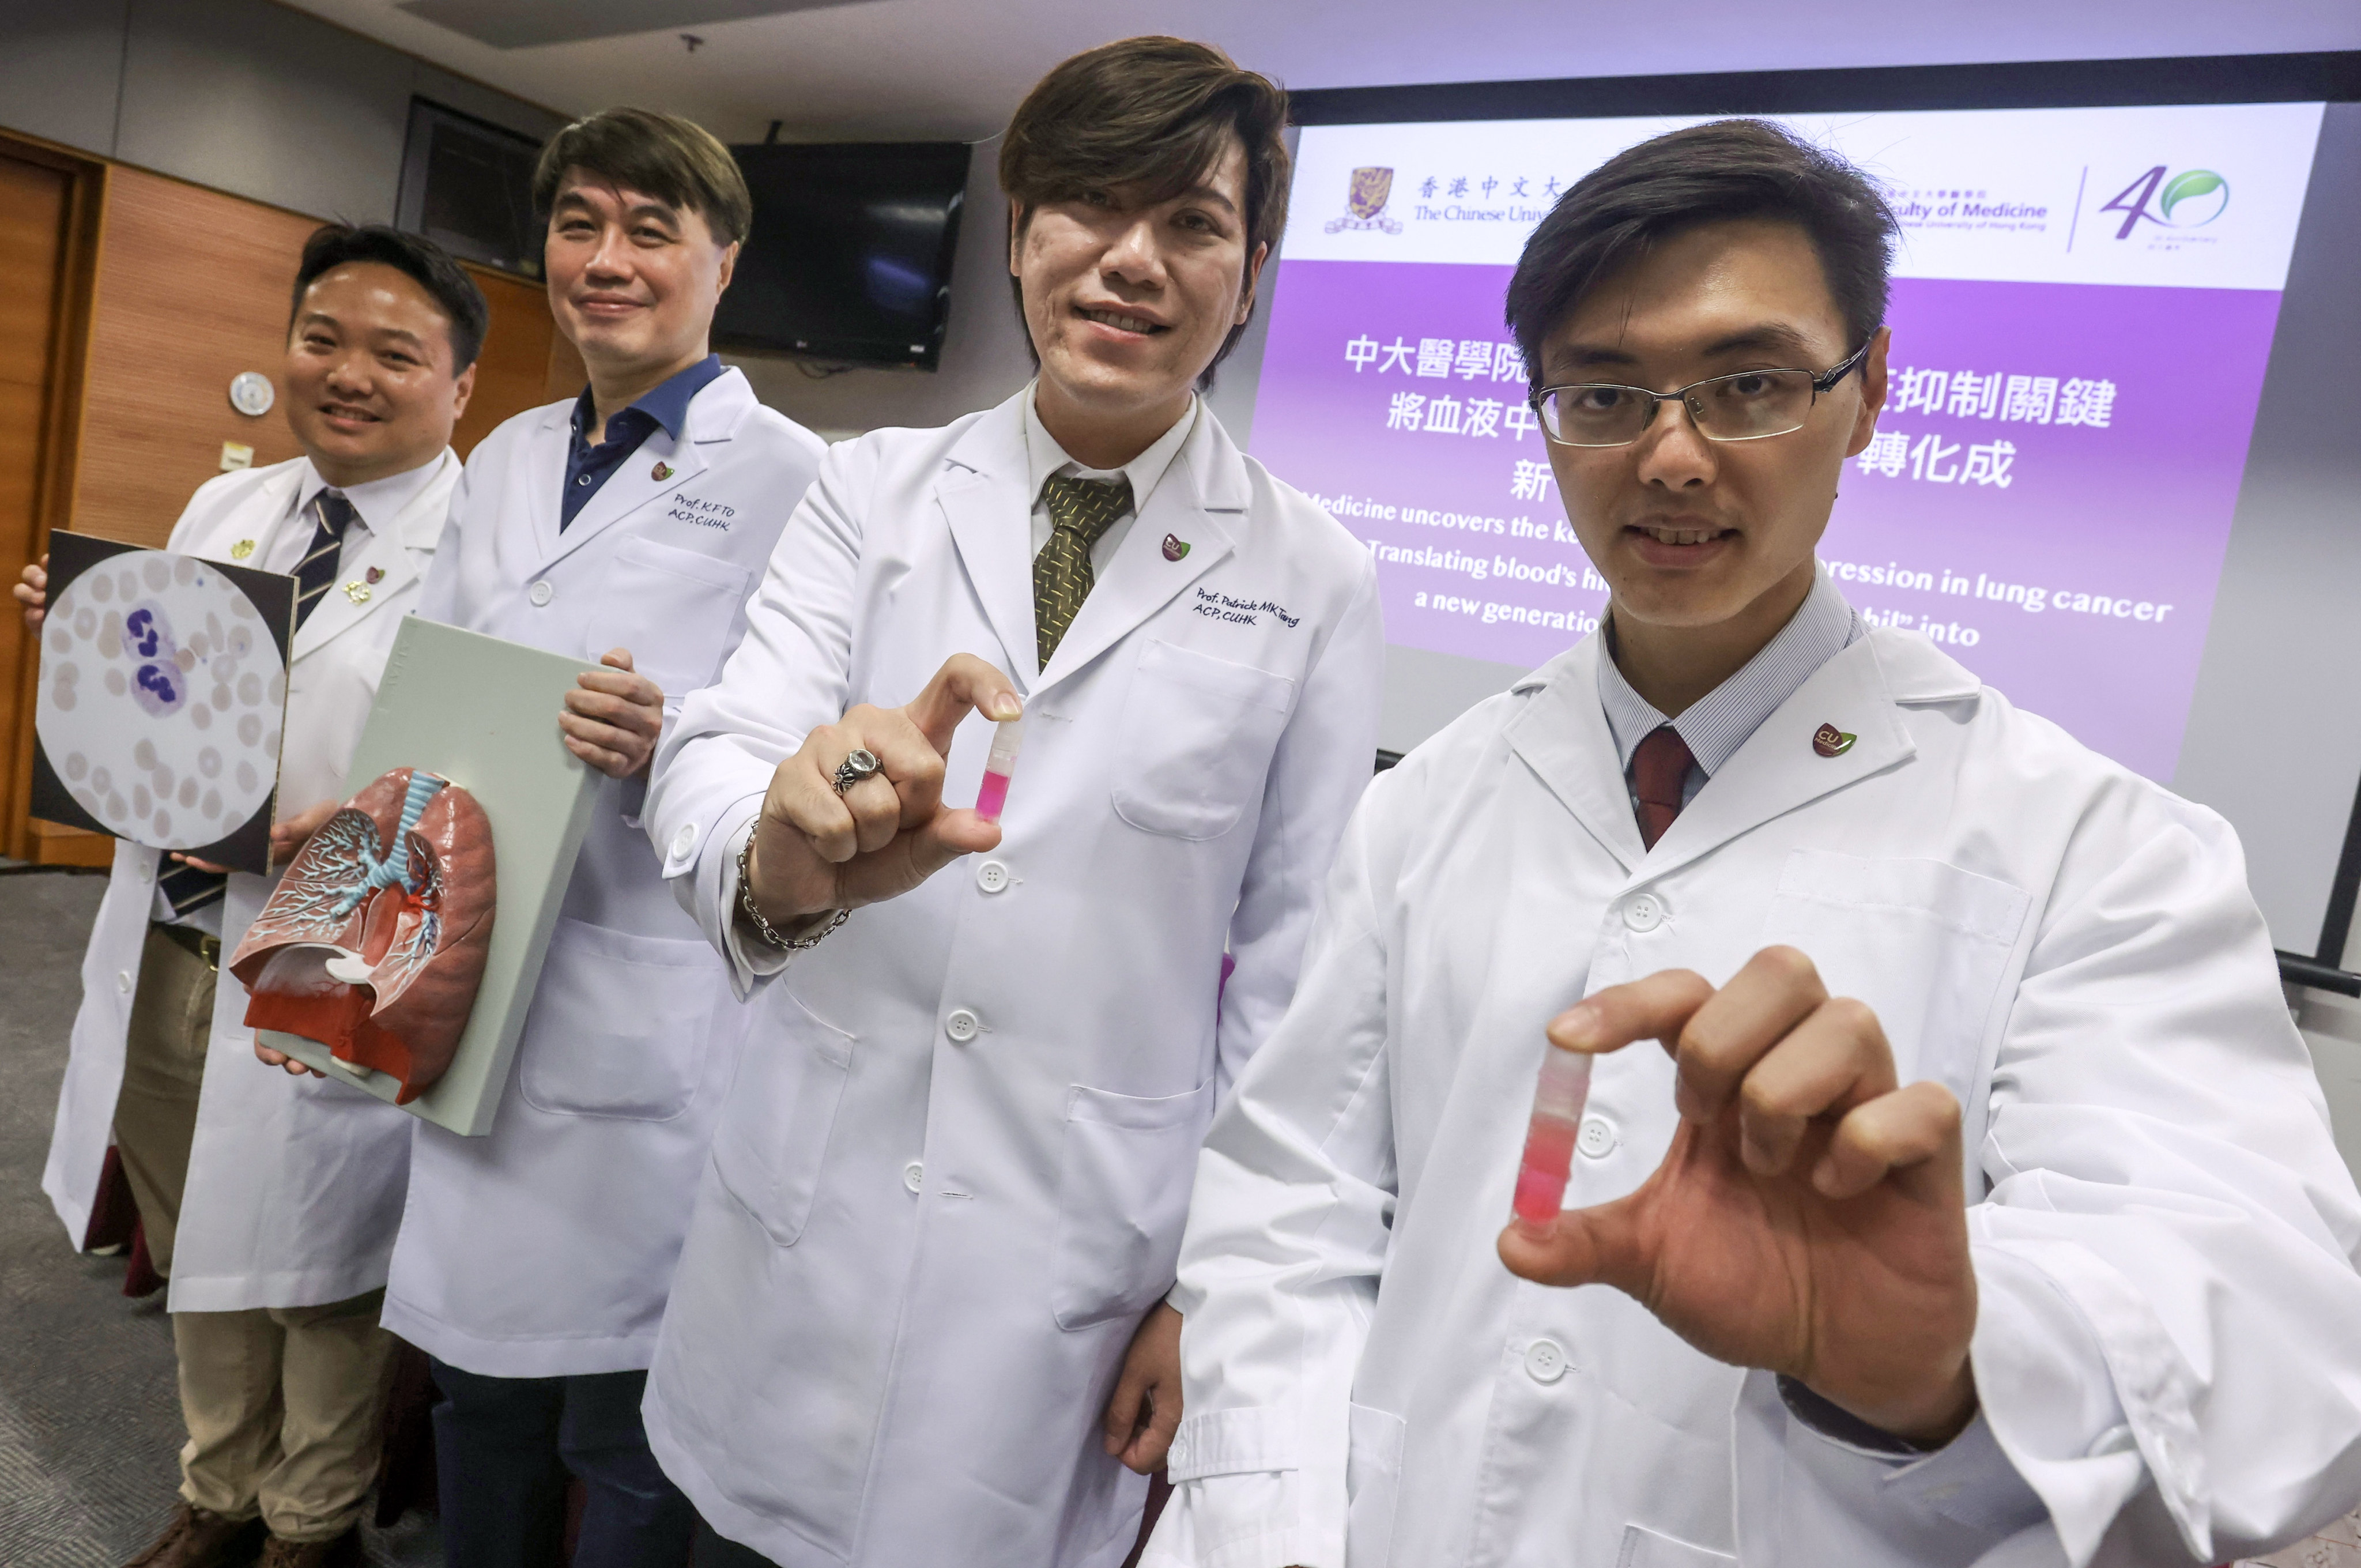 The Chinese University team says its findings could help 70 per cent of patients who do not  benefit from existing immunotherapy methods. Photo: Jonathan Wong